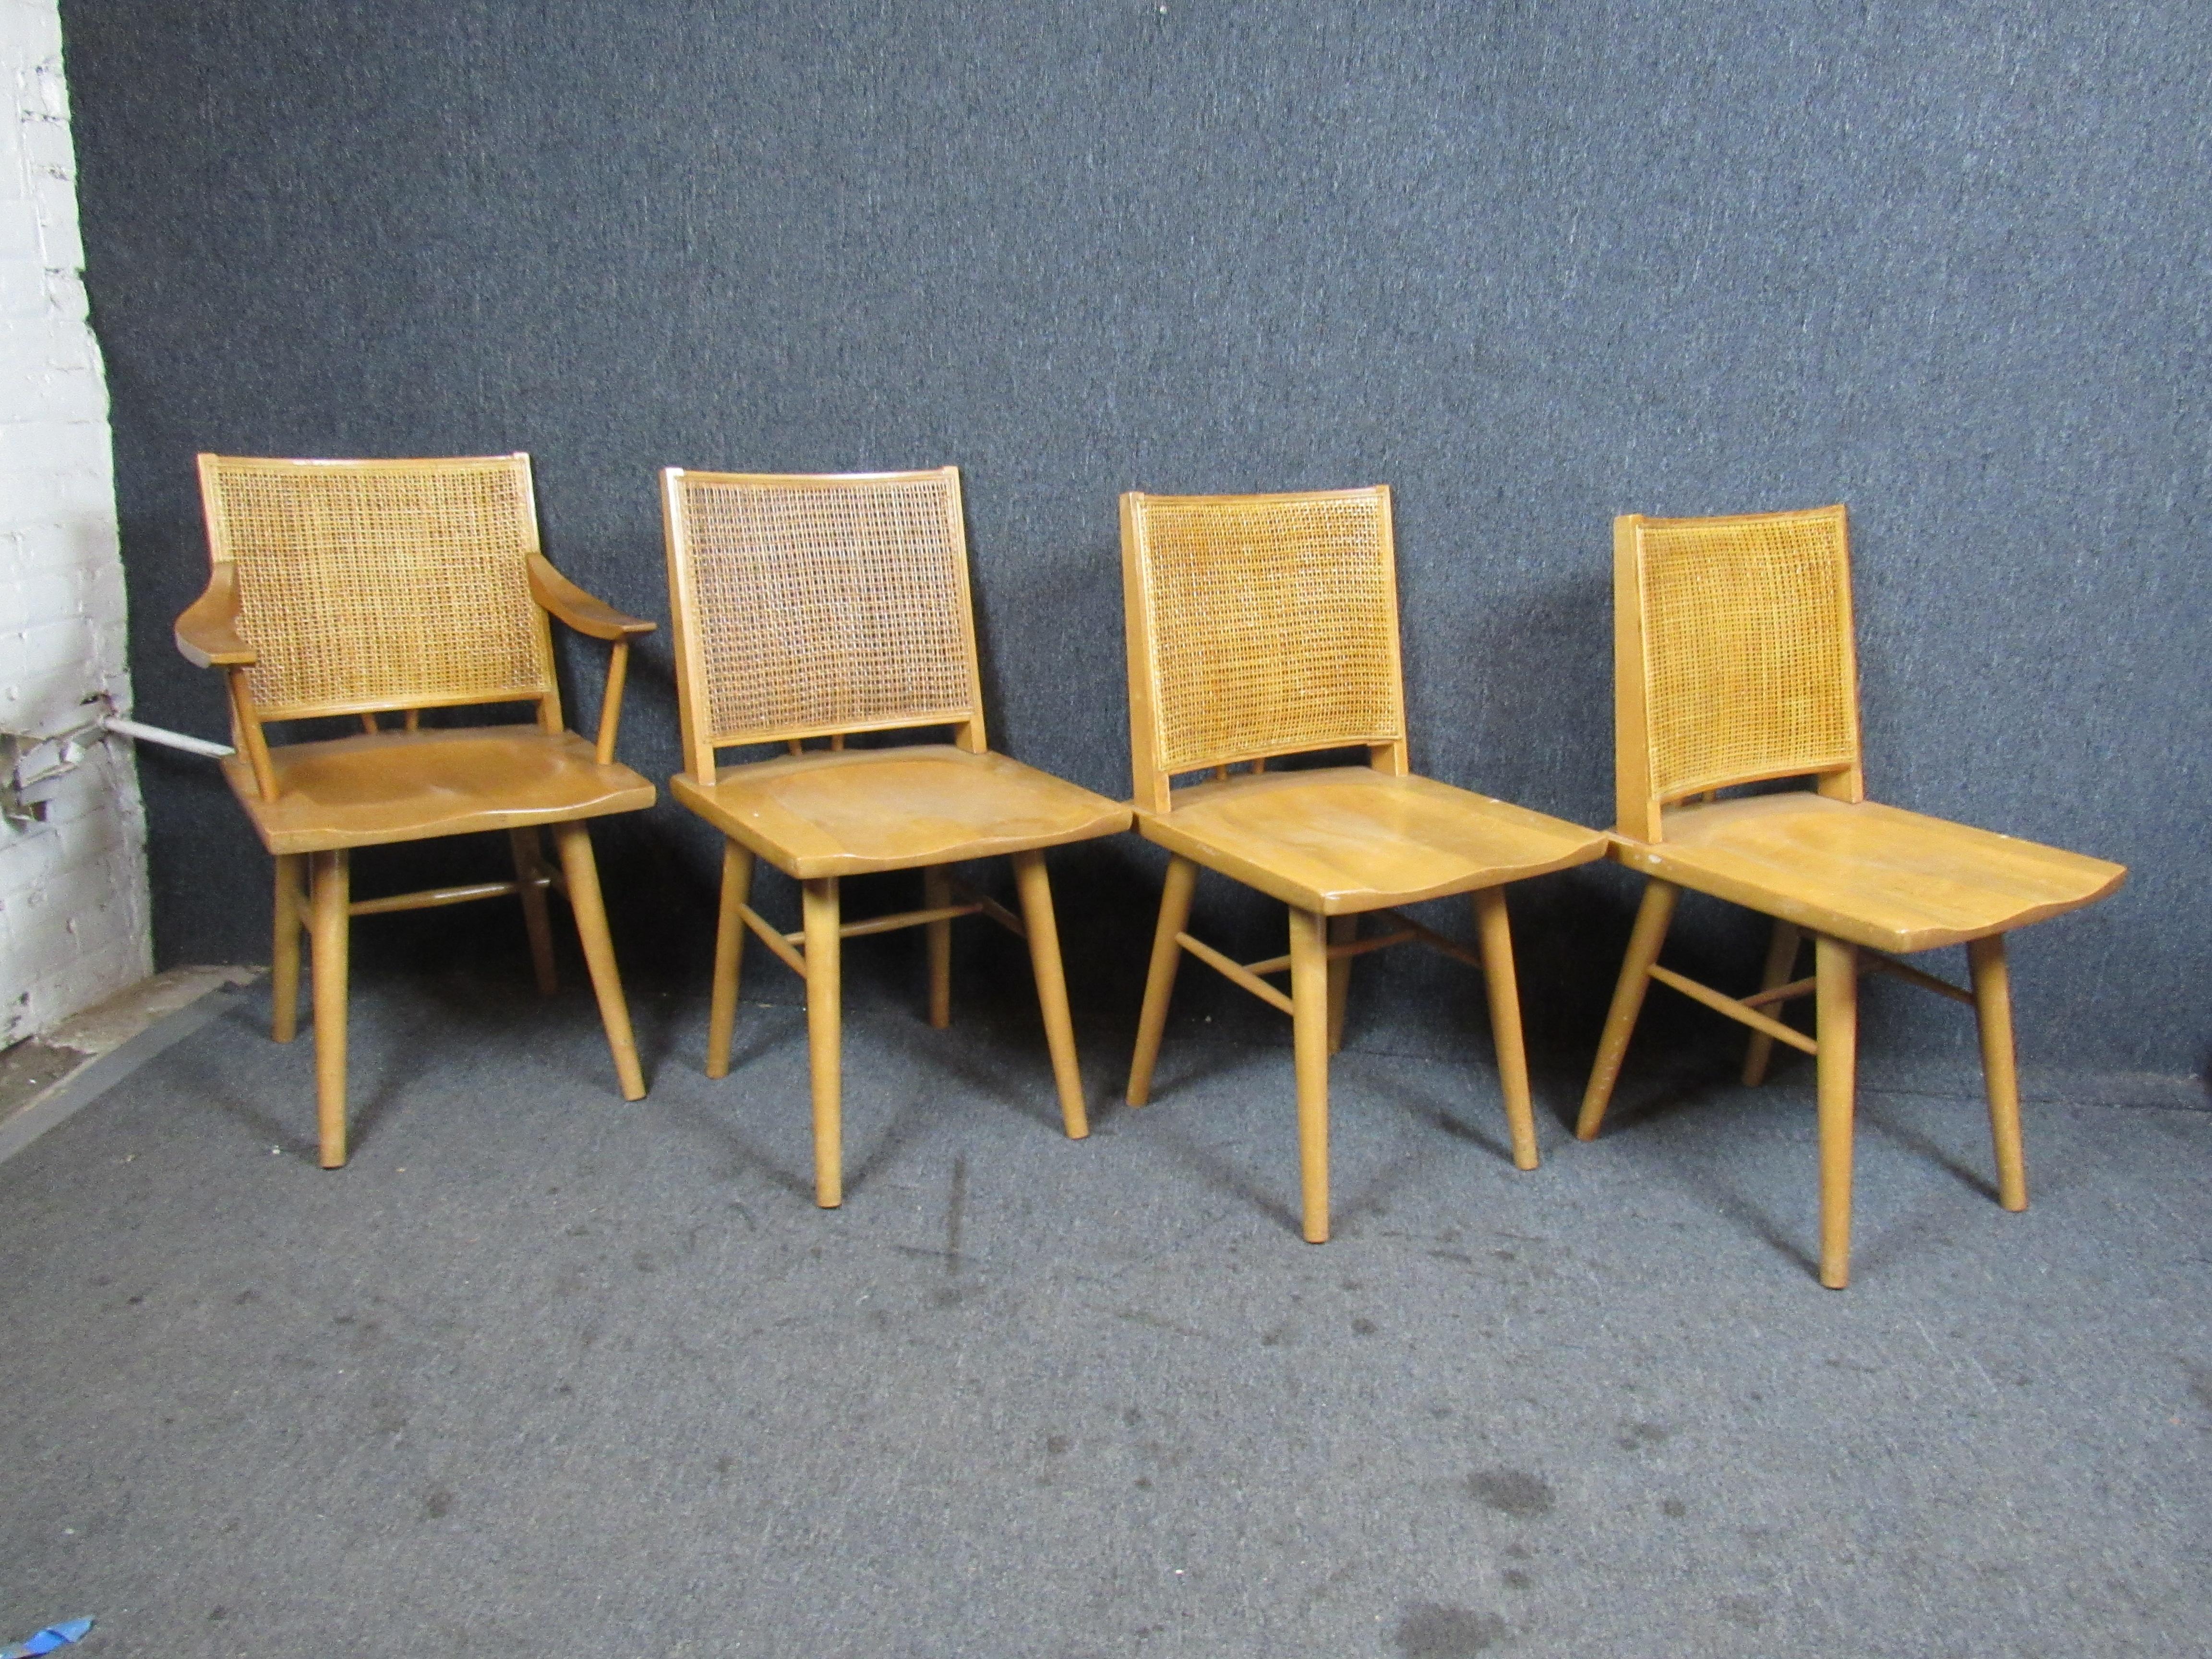 Absolutely charming set of four vintage maple and wicker dining chairs designed by Leslie Diamond for Conant Ball. The light-hued wood grain is sure to shine in any number of settings. A lovely wicker back adds to their timeless appeal. Set includes